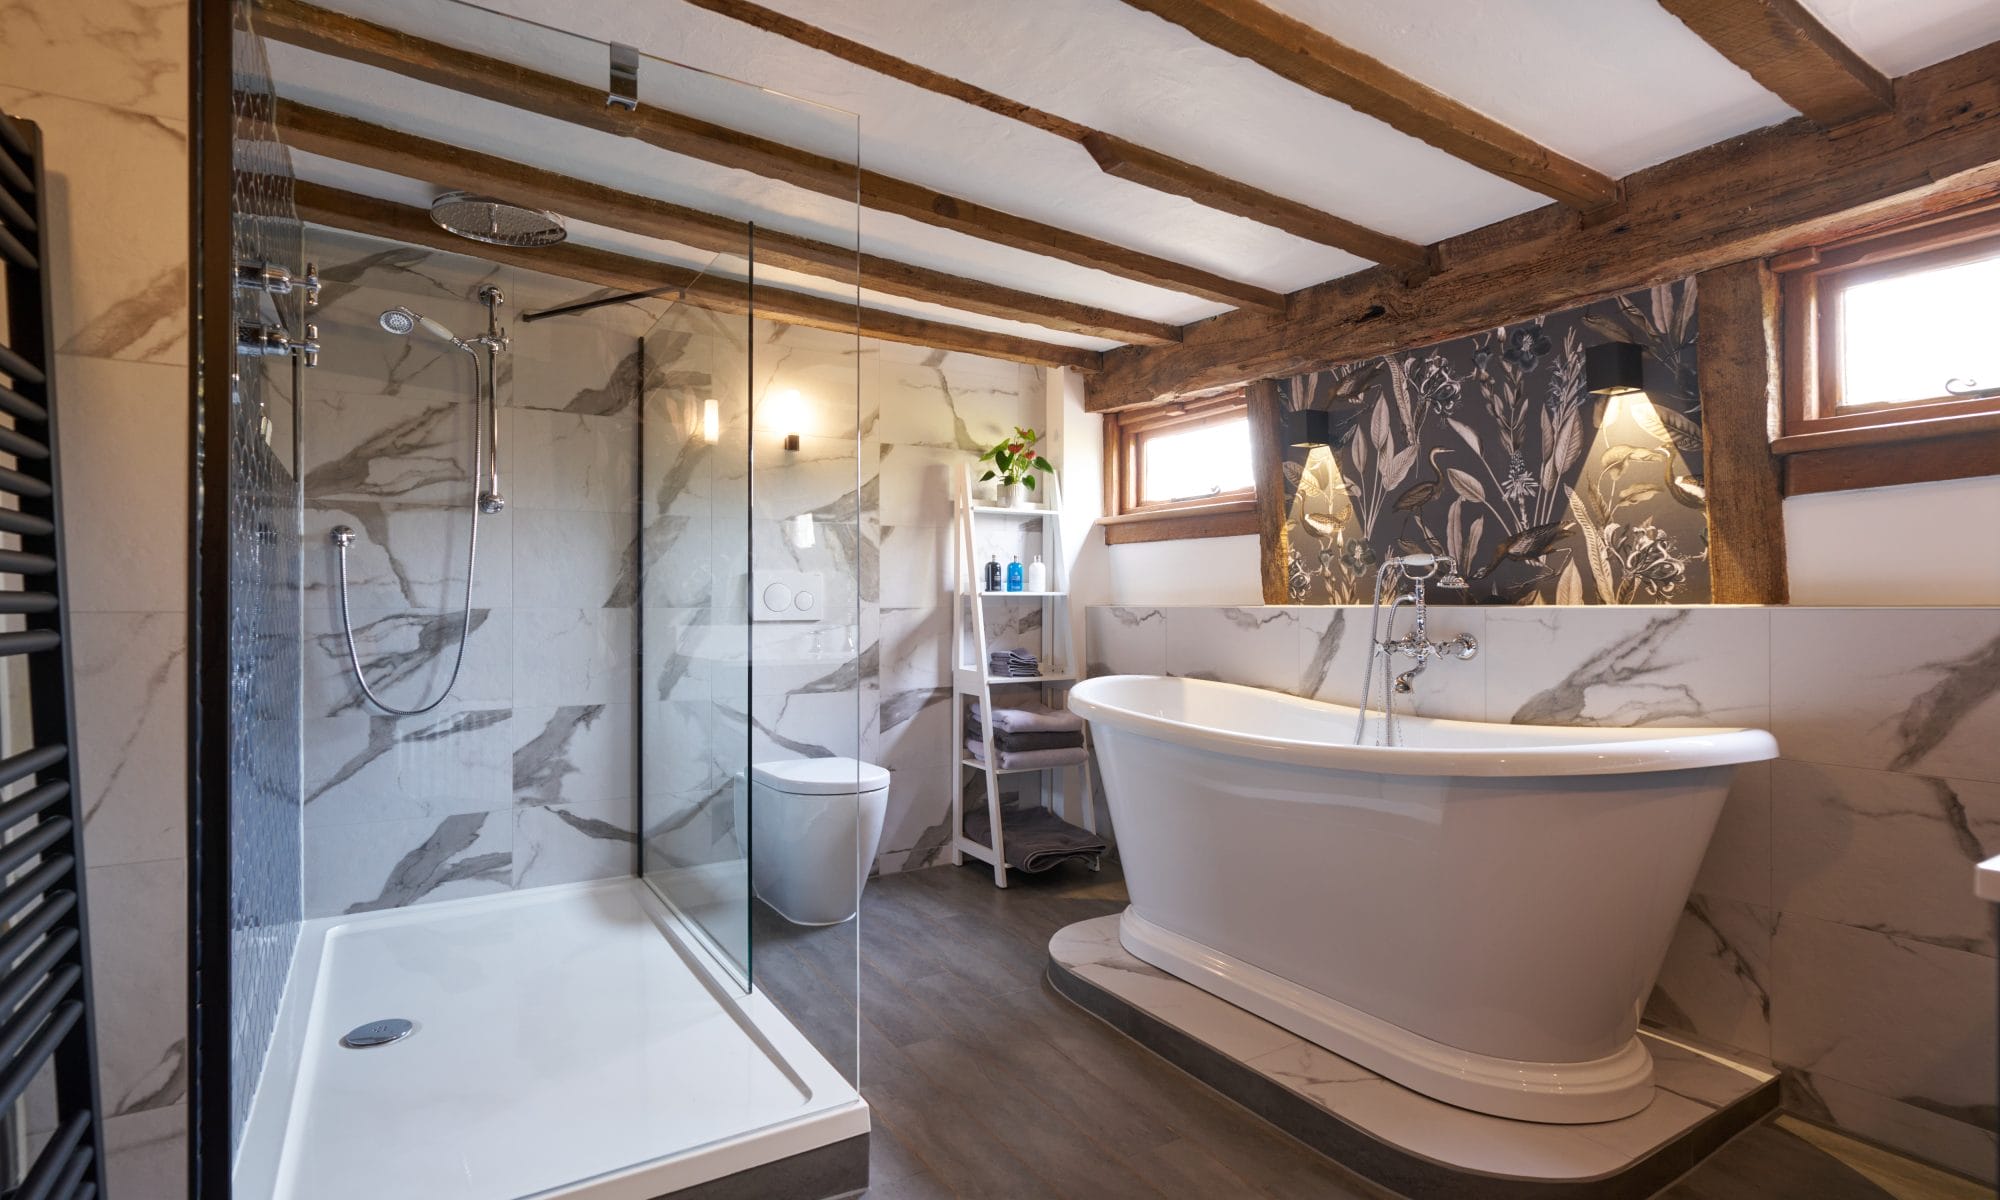 Bathroom Design with Boat Bath on Plinth with feature wallpaper